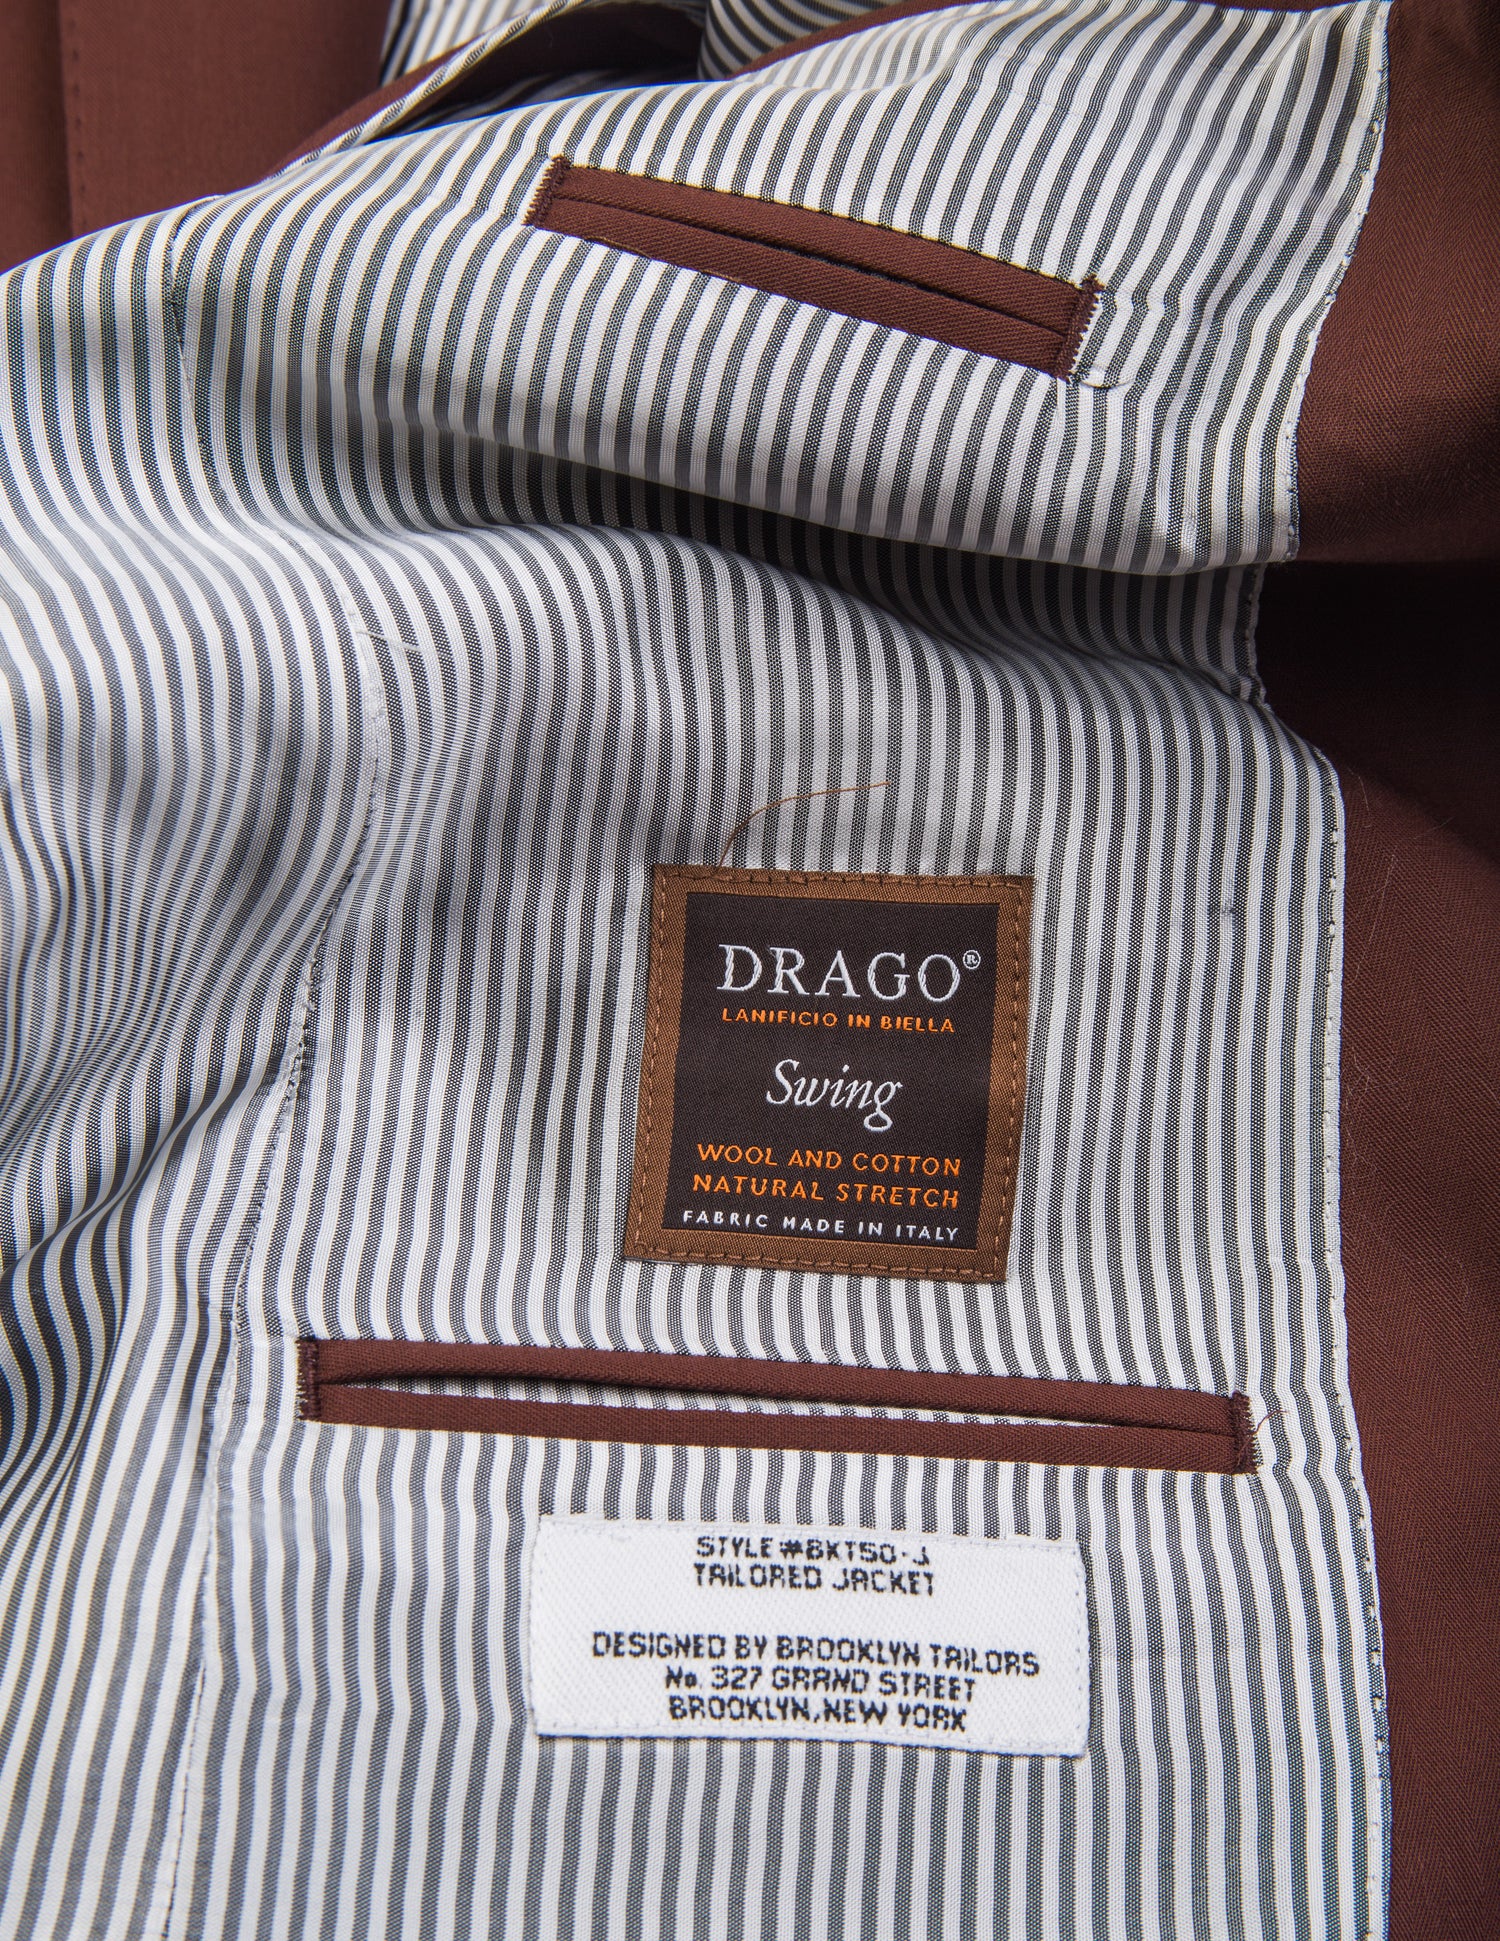 Detail shot of Brooklyn Tailors BKT50 Tailored Jacket in Herringbone Wool/Cotton - Brick showing lining and Drago label